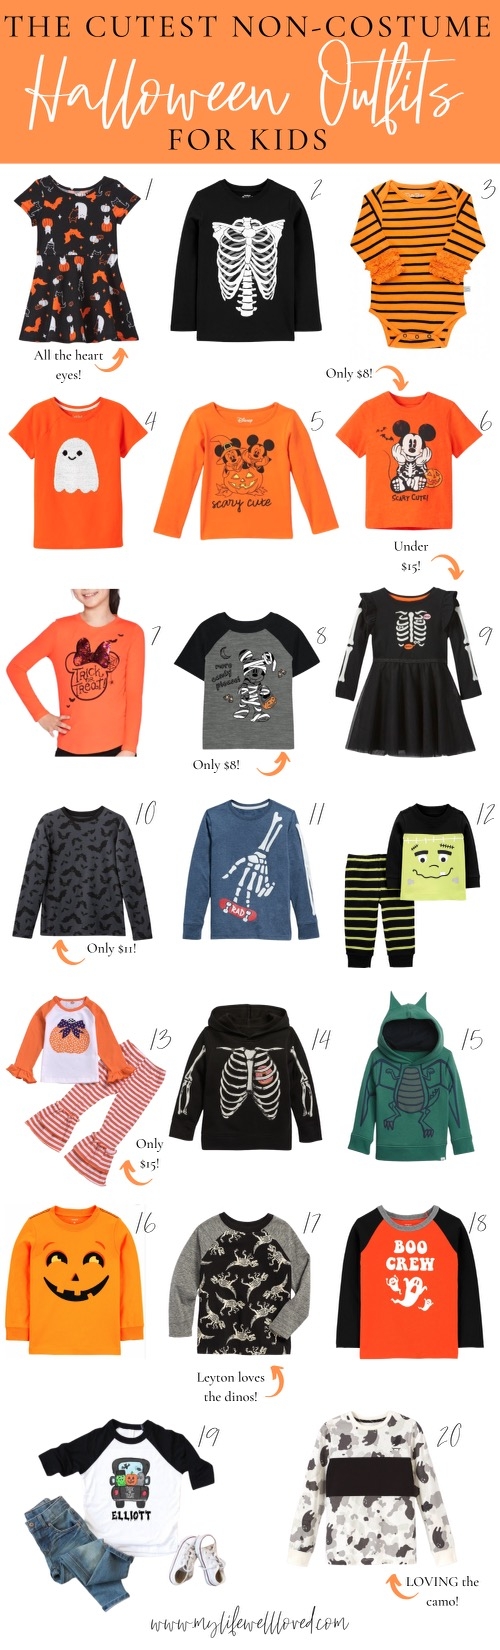 Top 20 Cute Halloween Outfits For Boys & Girls - My Life Well Loved